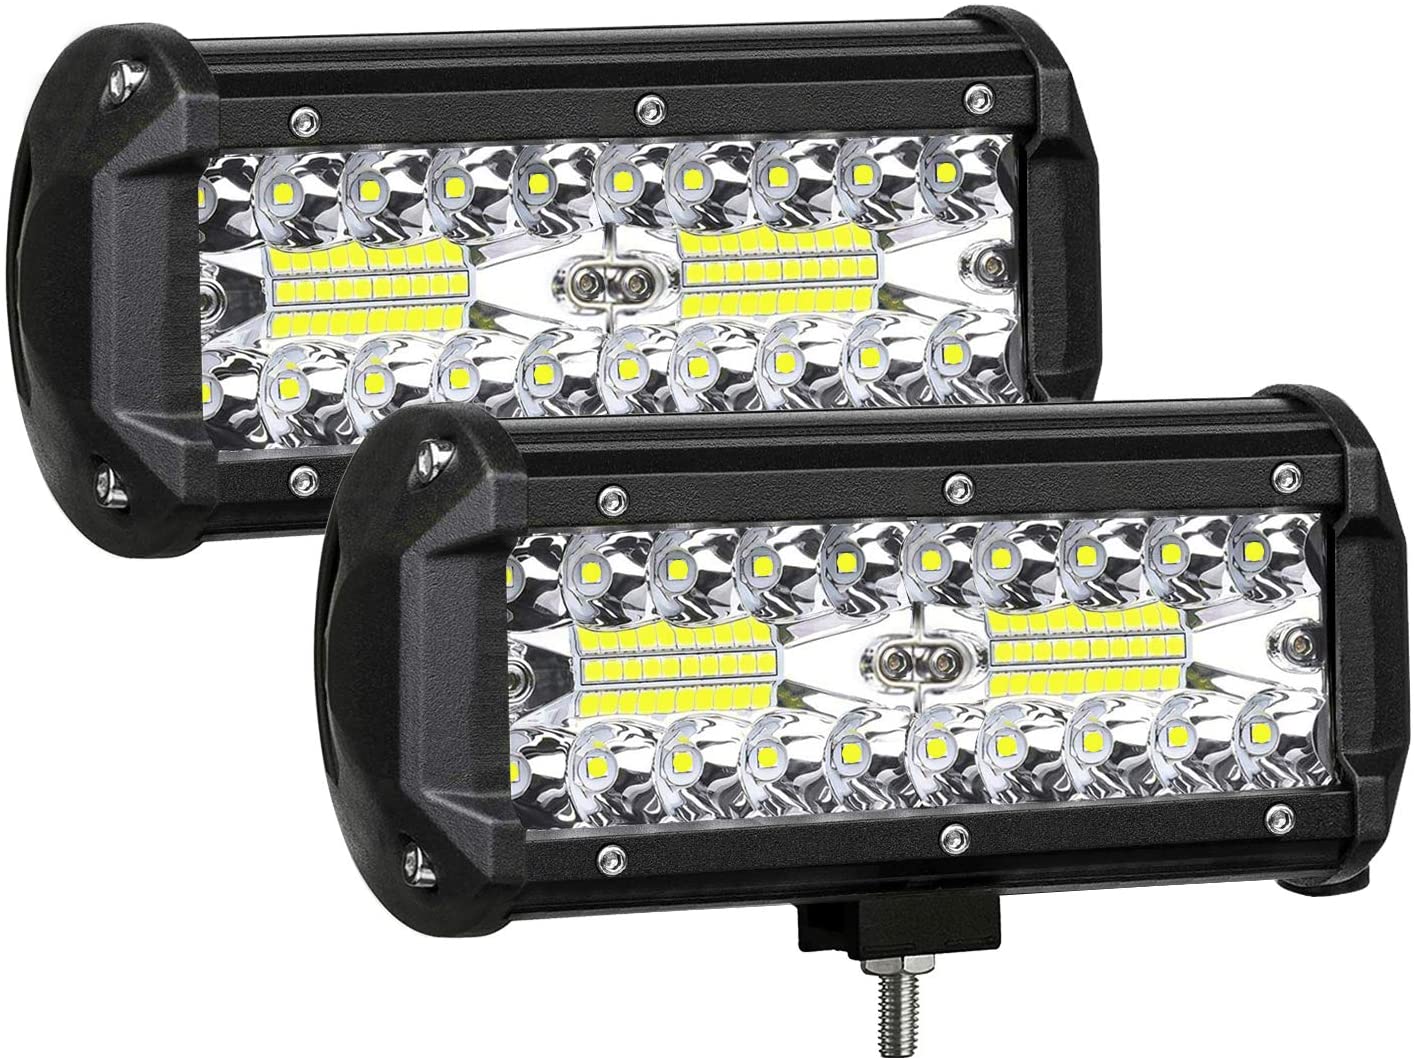 2x 9inch LED Work Light Bar 54W Straight Truck Off-road ATV SUV Boat Driving Jee